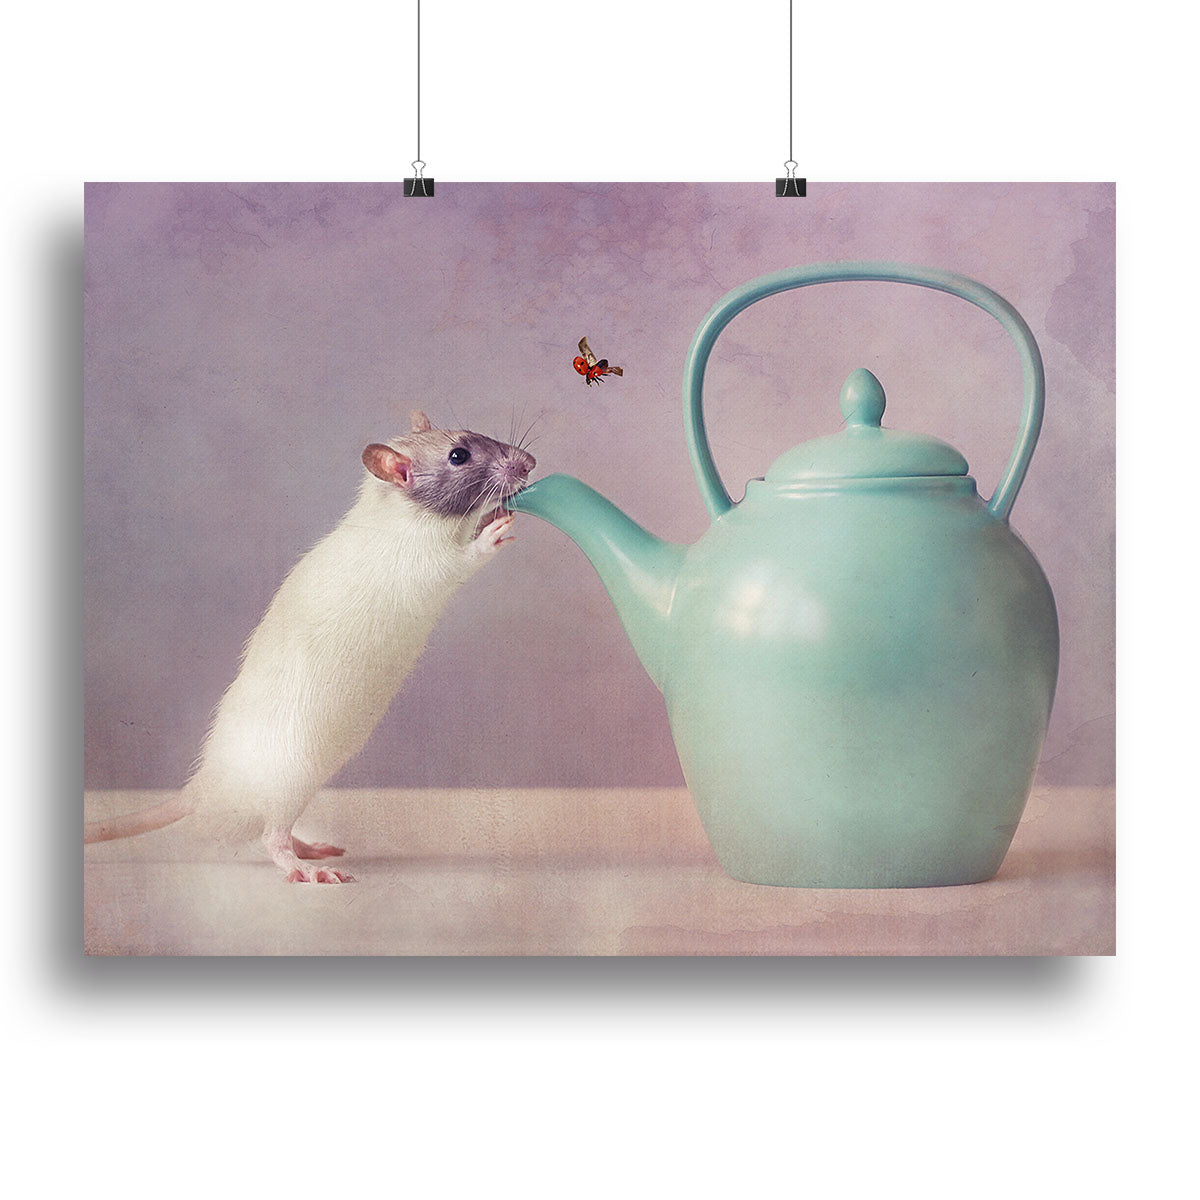 Snoozy Canvas Print or Poster - 1x - 2